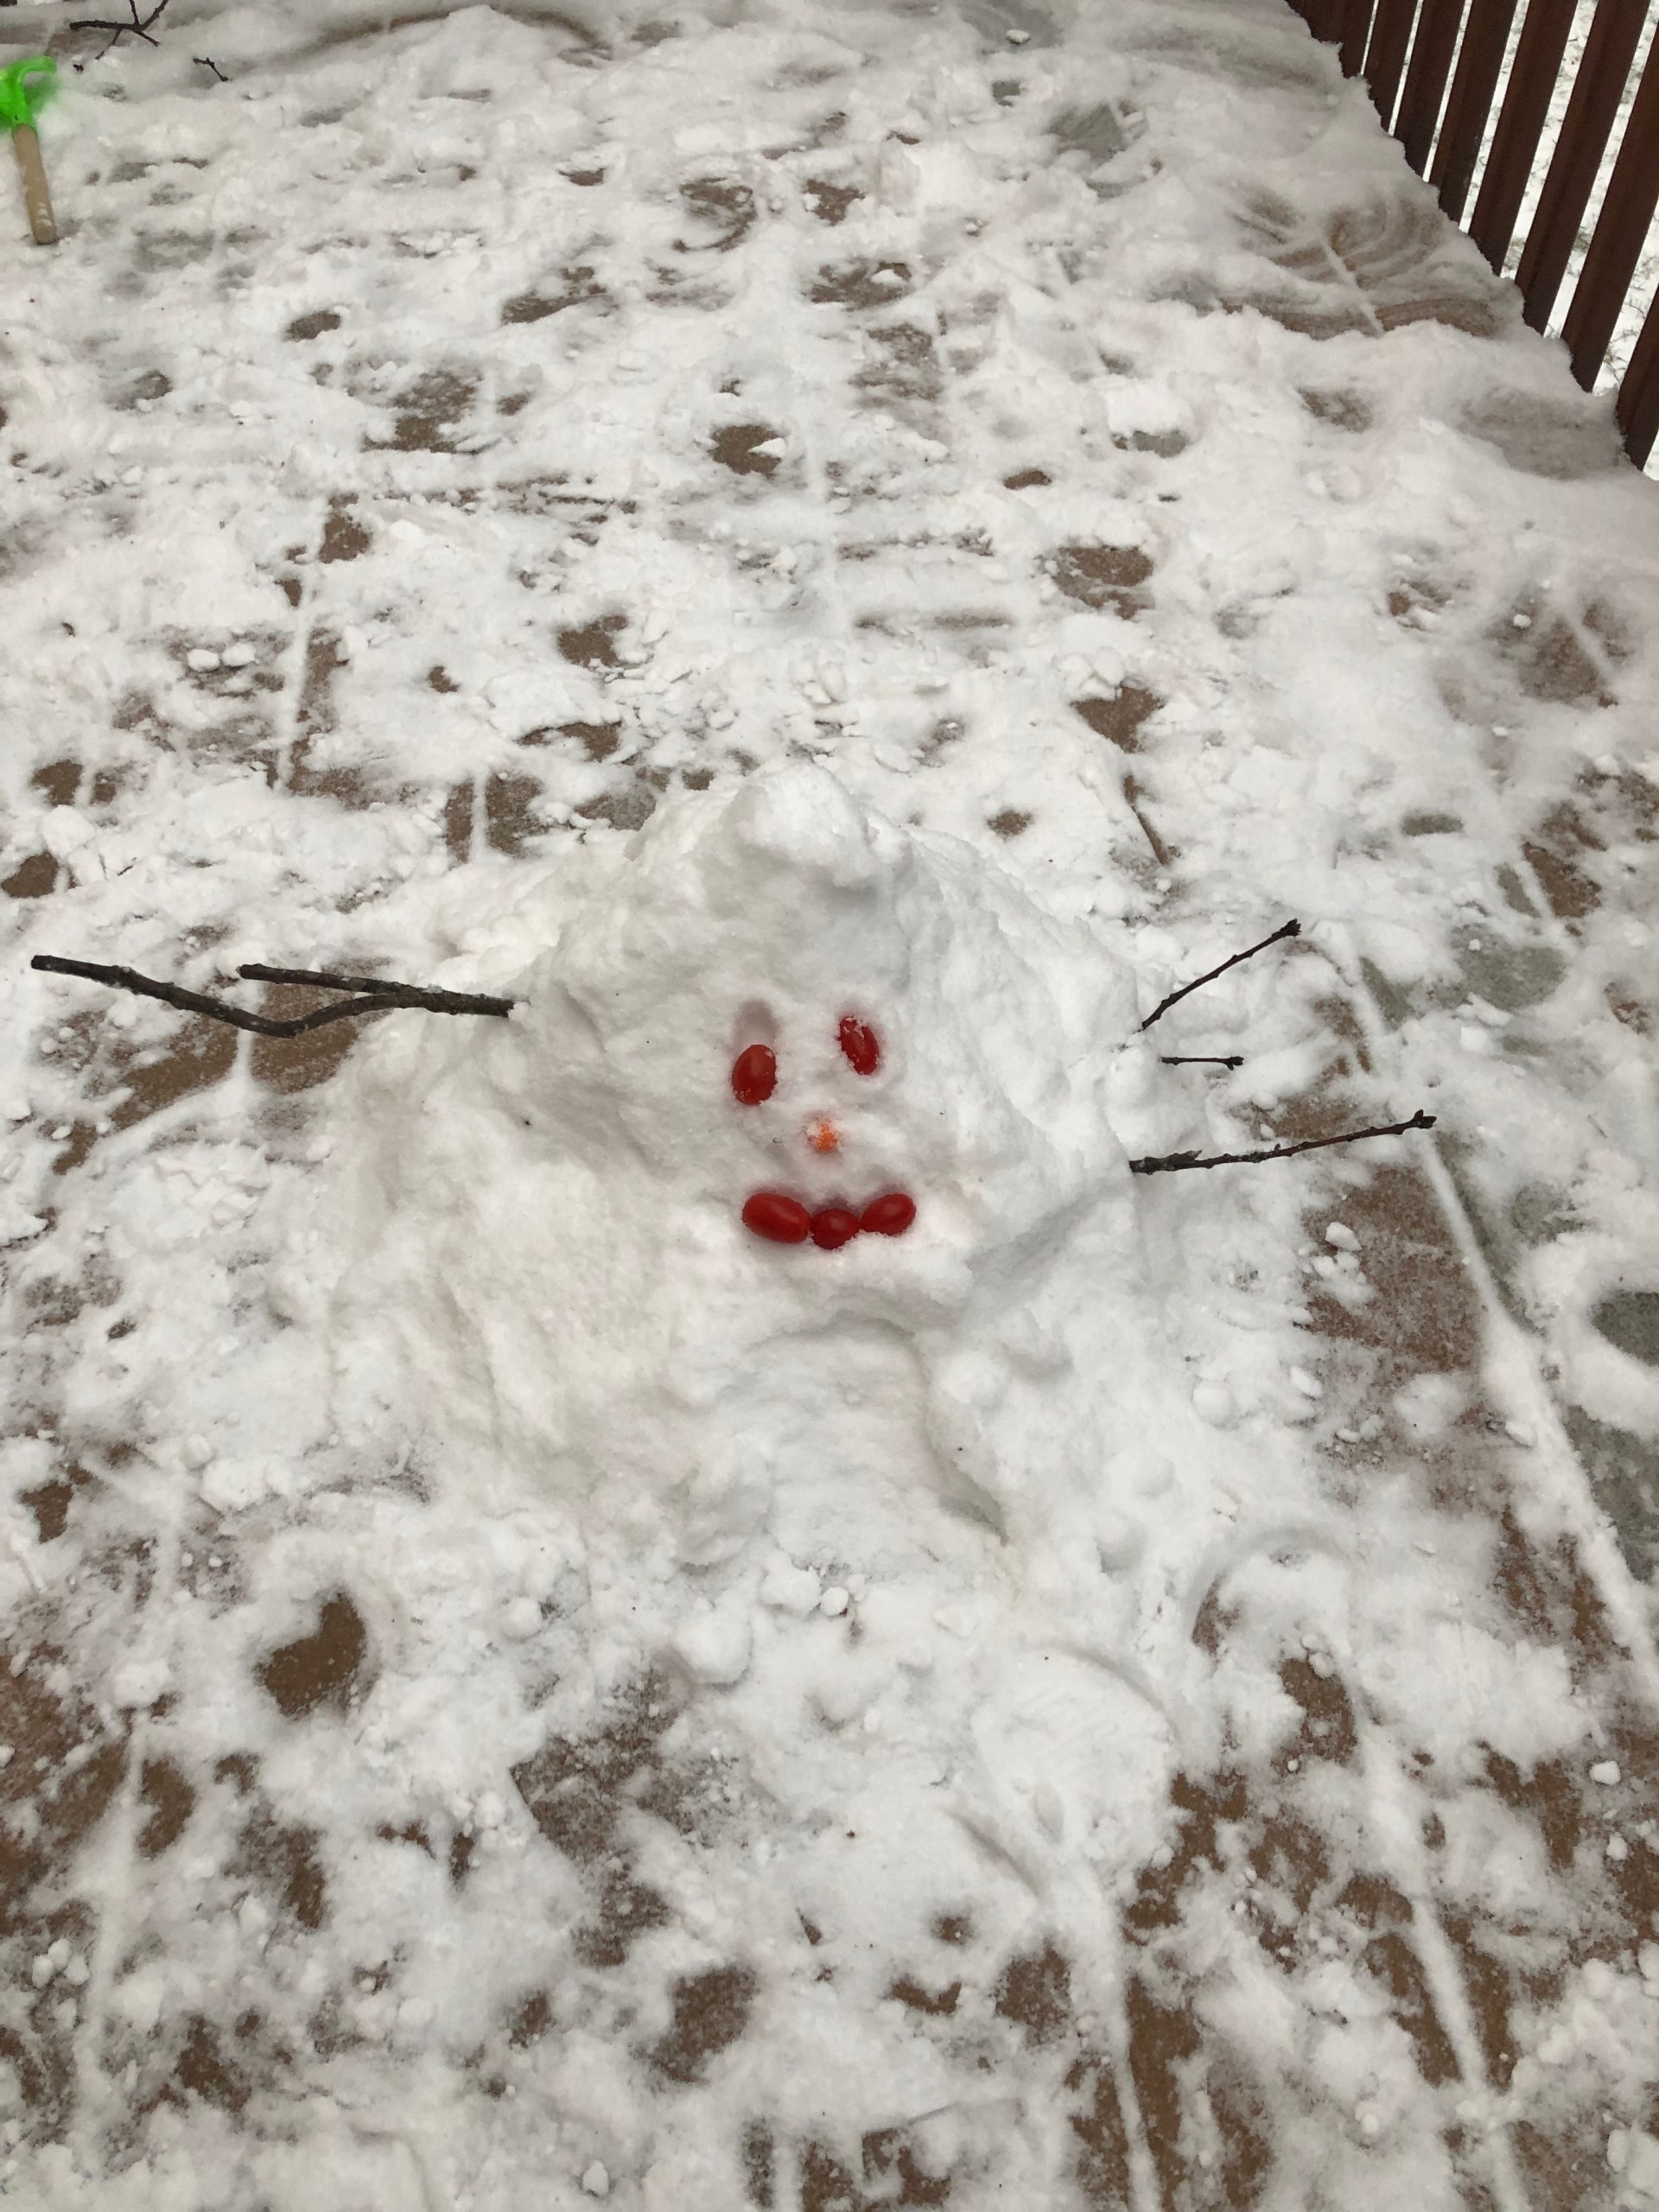 snowman made with vegetable face on deck